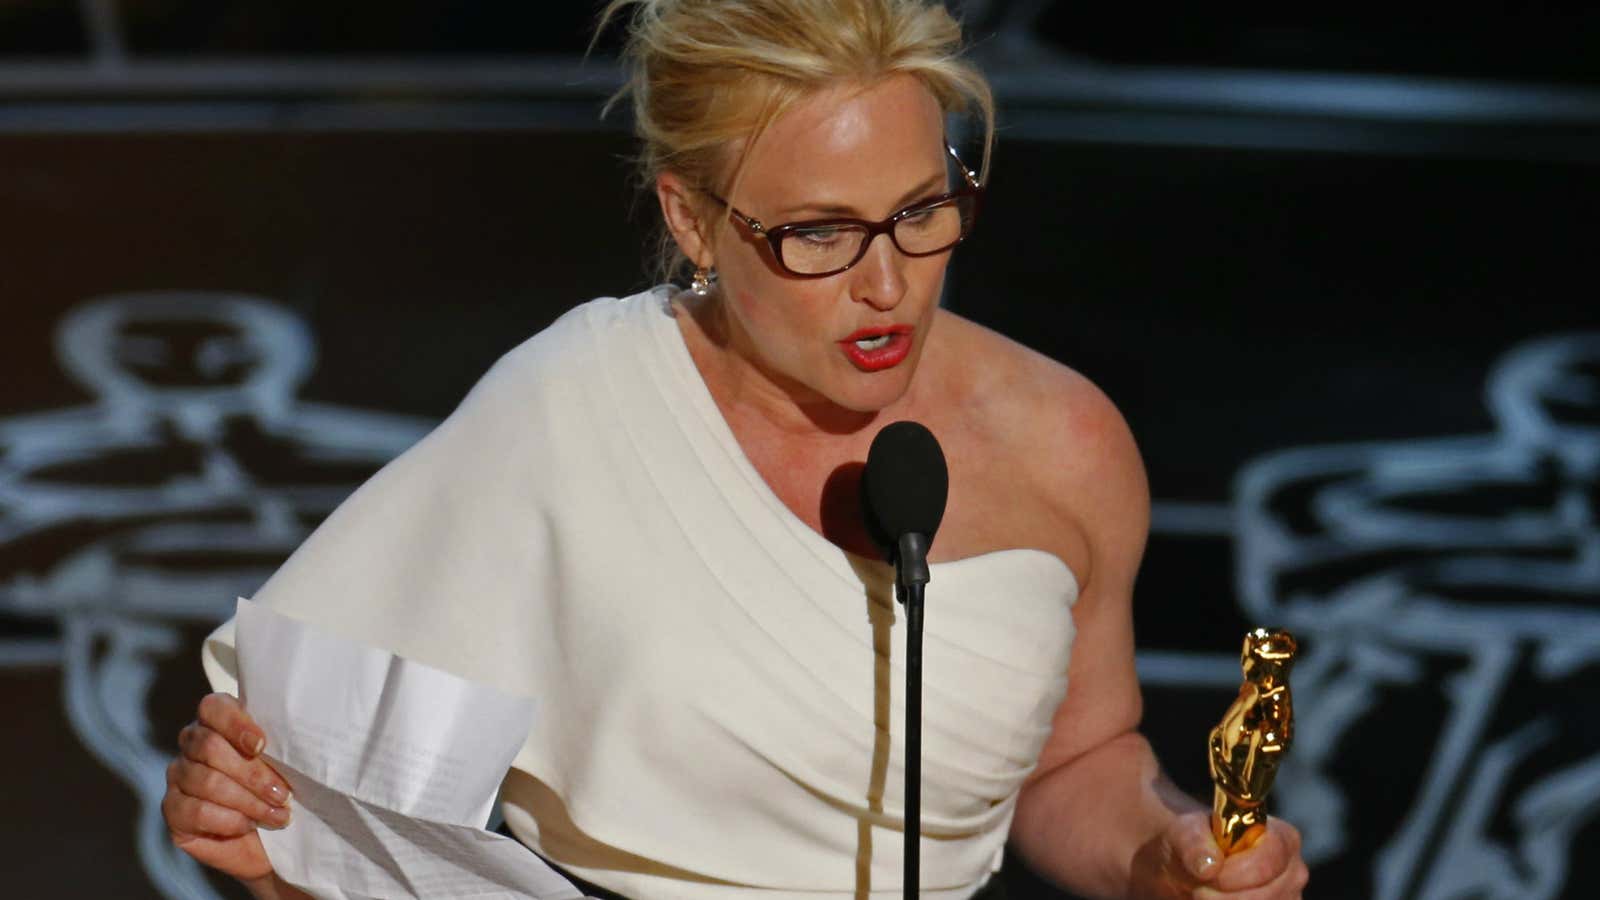 Patricia Arquette won the Oscar for Best Supporting Actress for her role in “Boyhood.”